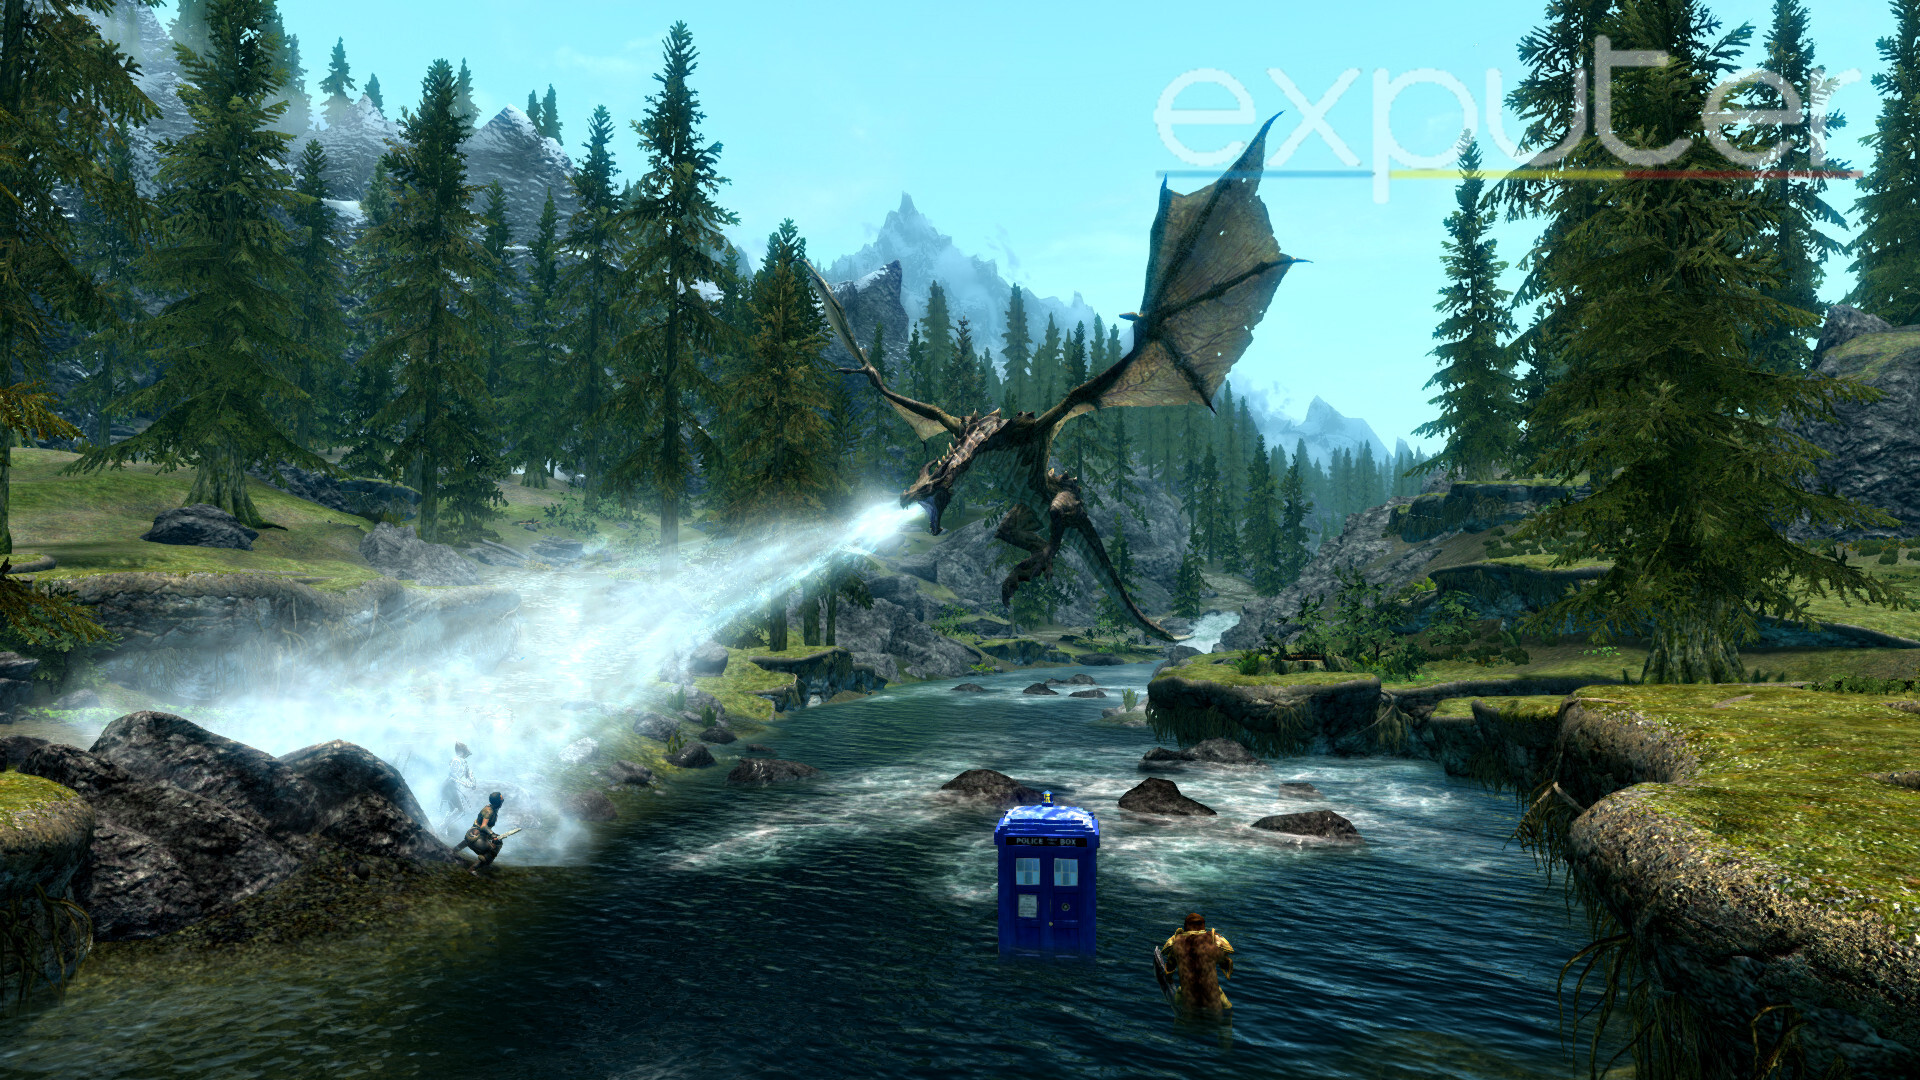 Realistic Water Two mod in Skyrim